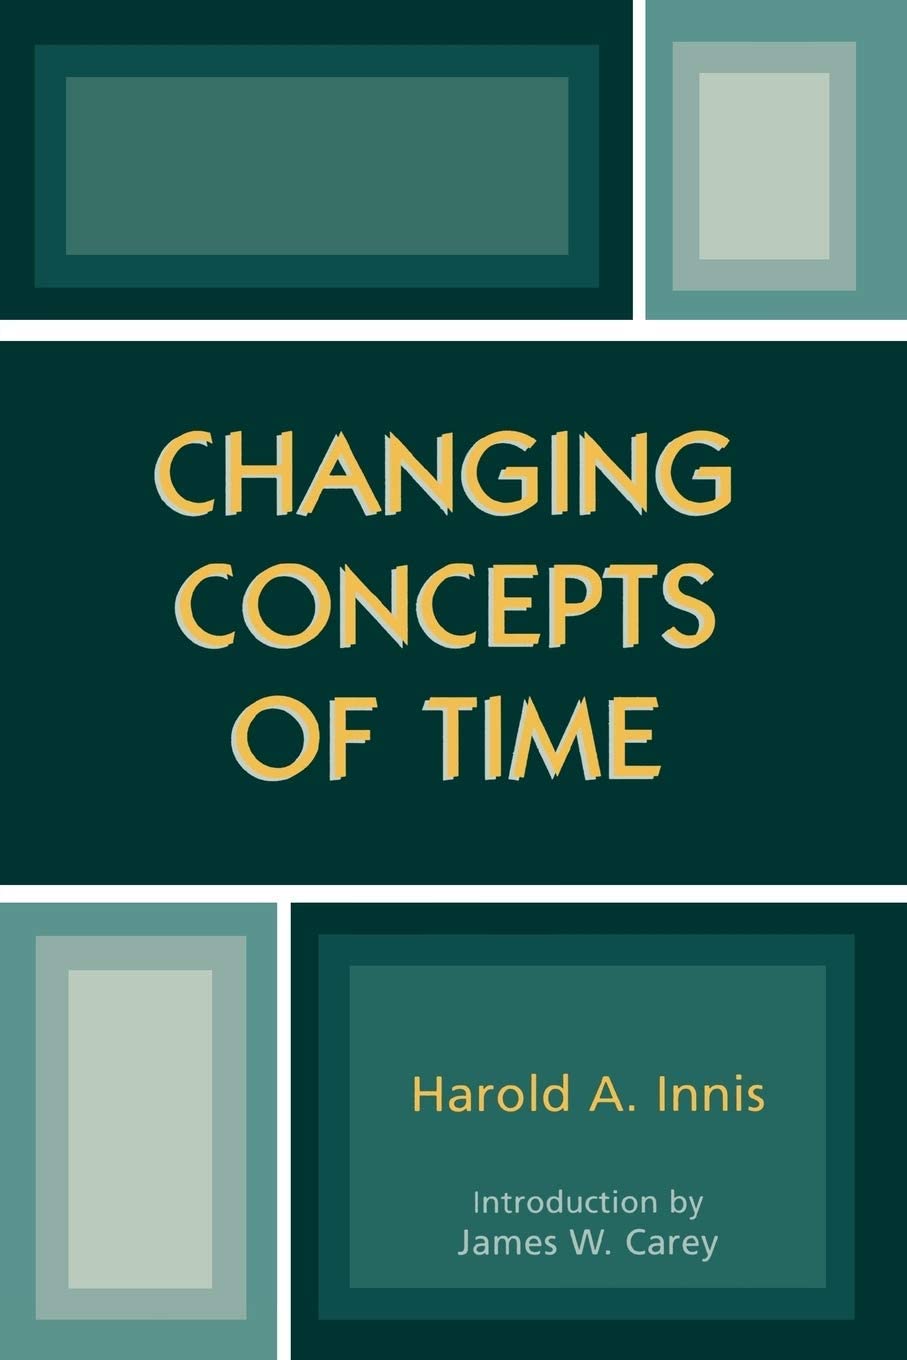 Changing Concepts of Time (Critical Media Studies: Institutions, Politics, and Culture)